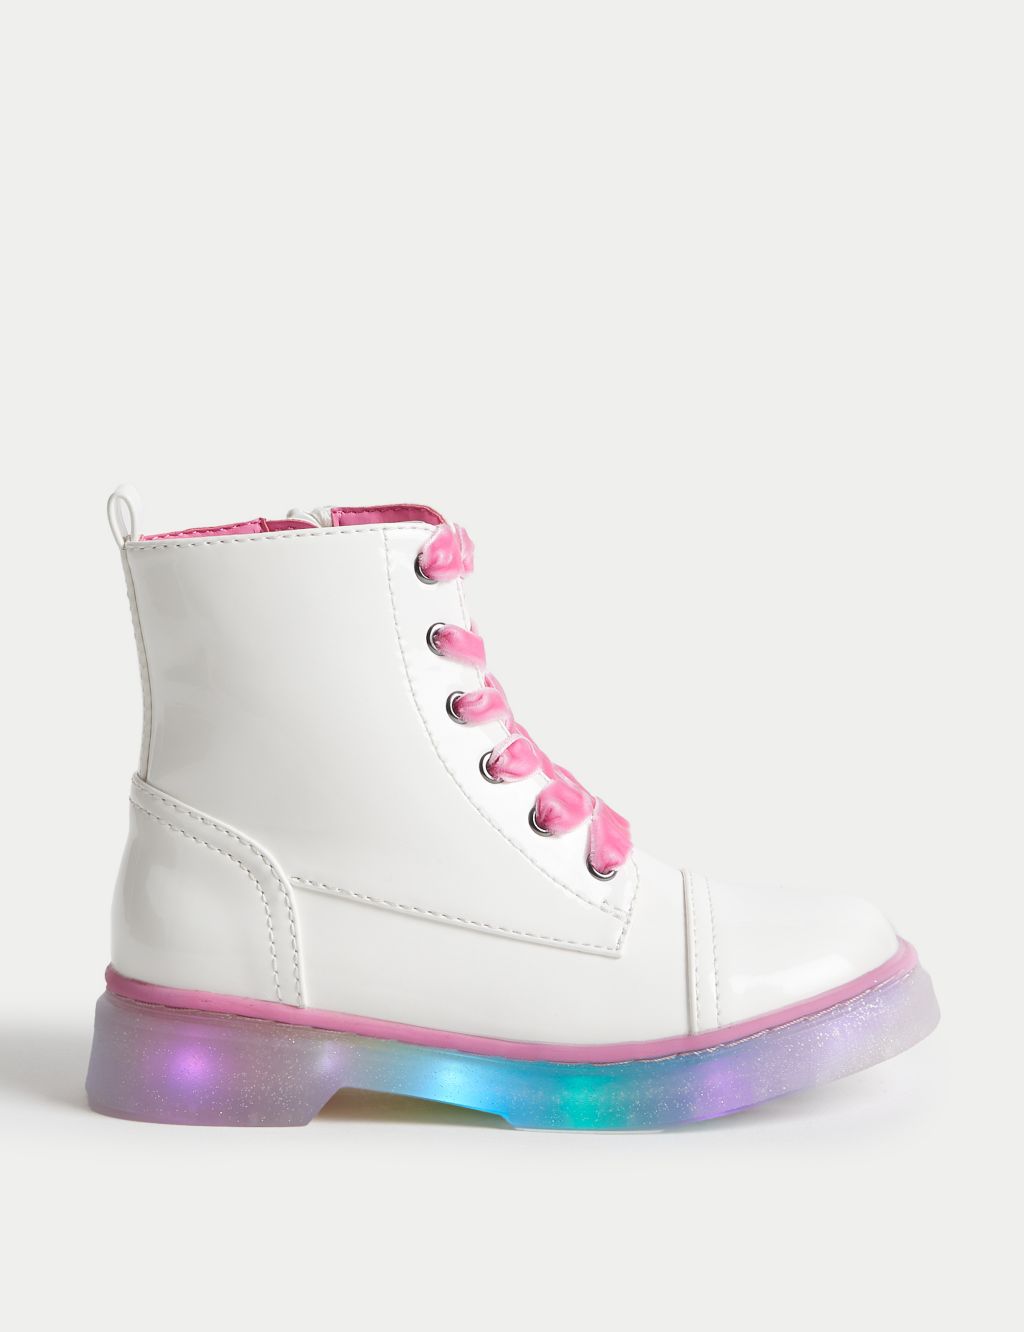 Girls Led Light Up Boots Kids Wedding Party Glitter Sneaker Shoes Xmas  Gifts